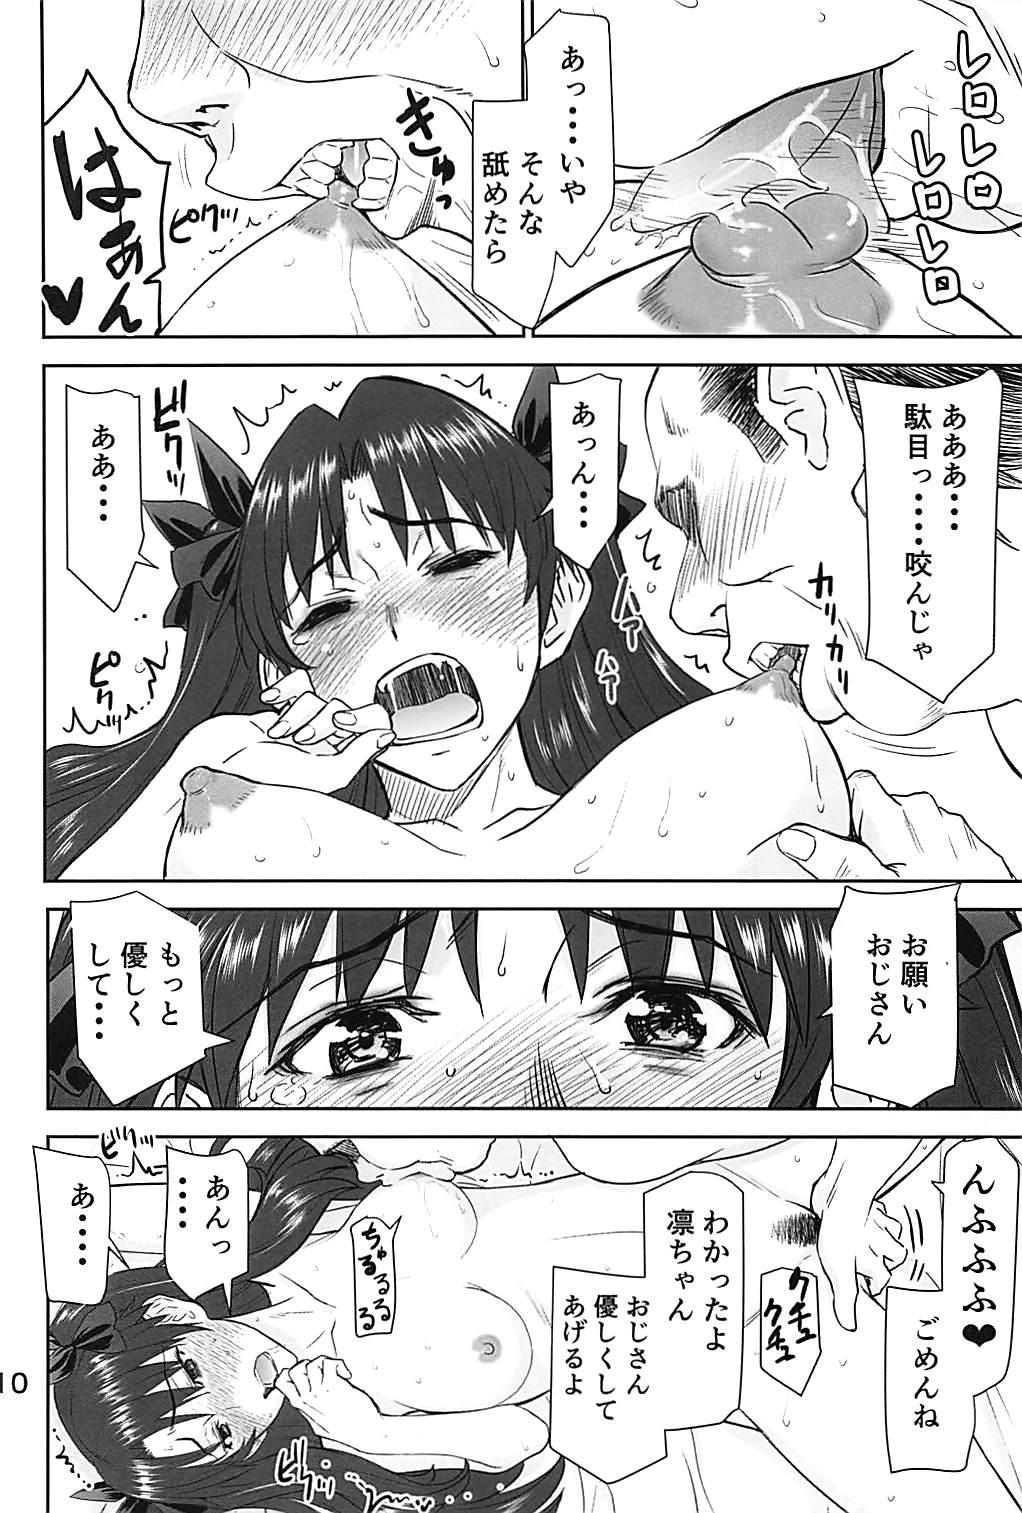 Swingers Rinkan Mahou 4 - Fate stay night Gay Rimming - Page 9